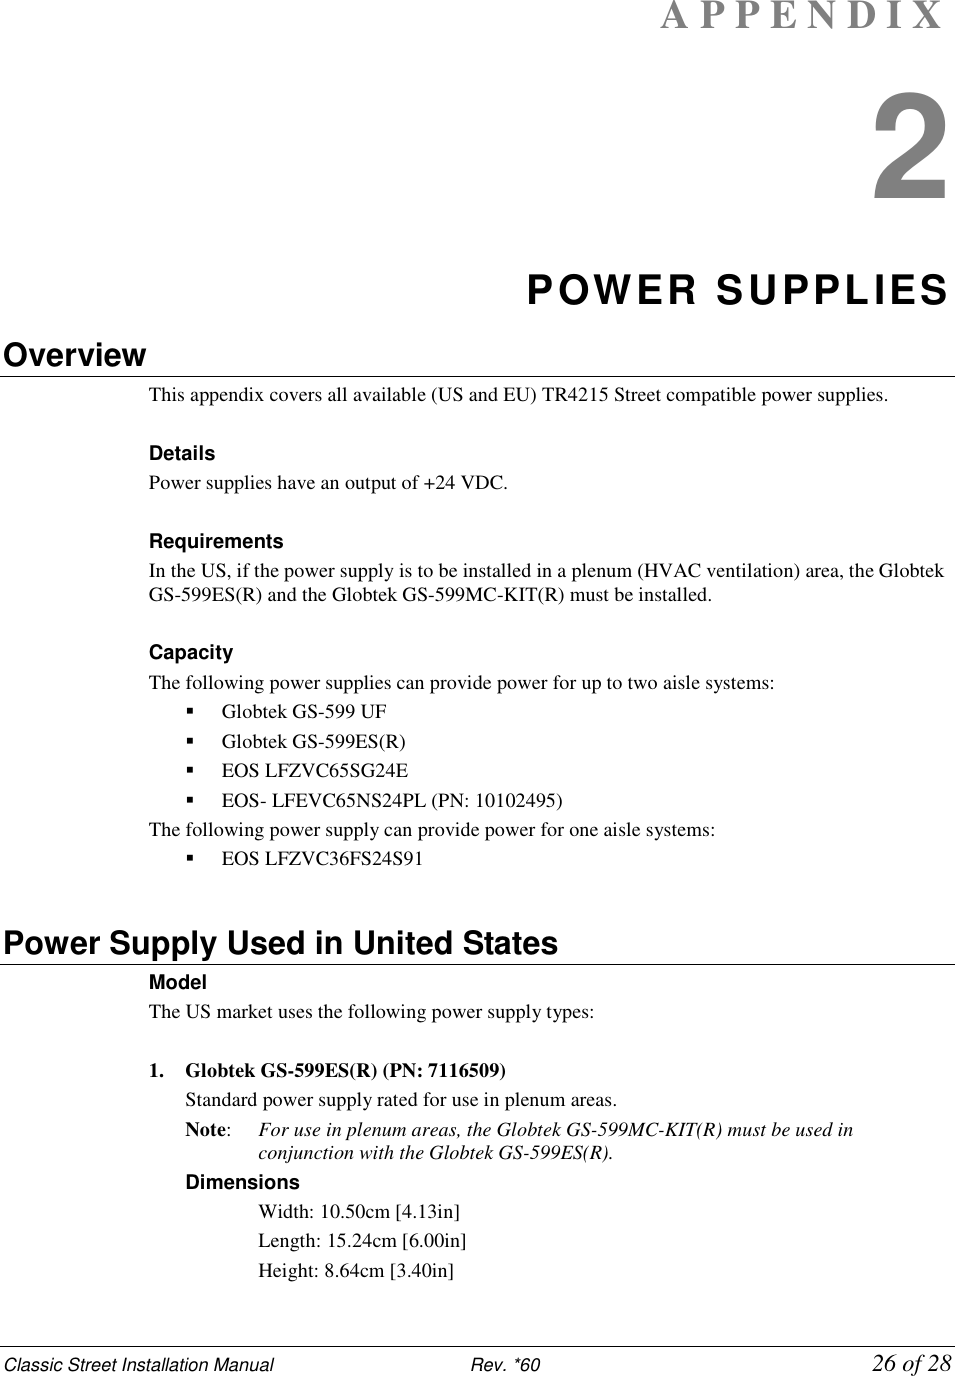 Classic Street Installation Manual                           Rev. *60             26 of 28 A P P E N D I X  2 POWER SUPPLIES Overview This appendix covers all available (US and EU) TR4215 Street compatible power supplies.  Details Power supplies have an output of +24 VDC.  Requirements In the US, if the power supply is to be installed in a plenum (HVAC ventilation) area, the Globtek GS-599ES(R) and the Globtek GS-599MC-KIT(R) must be installed.  Capacity The following power supplies can provide power for up to two aisle systems:  Globtek GS-599 UF  Globtek GS-599ES(R)  EOS LFZVC65SG24E  EOS- LFEVC65NS24PL (PN: 10102495) The following power supply can provide power for one aisle systems:  EOS LFZVC36FS24S91  Power Supply Used in United States Model  The US market uses the following power supply types:  1. Globtek GS-599ES(R) (PN: 7116509) Standard power supply rated for use in plenum areas.  Note:   For use in plenum areas, the Globtek GS-599MC-KIT(R) must be used in conjunction with the Globtek GS-599ES(R).  Dimensions  Width: 10.50cm [4.13in]  Length: 15.24cm [6.00in]  Height: 8.64cm [3.40in] 